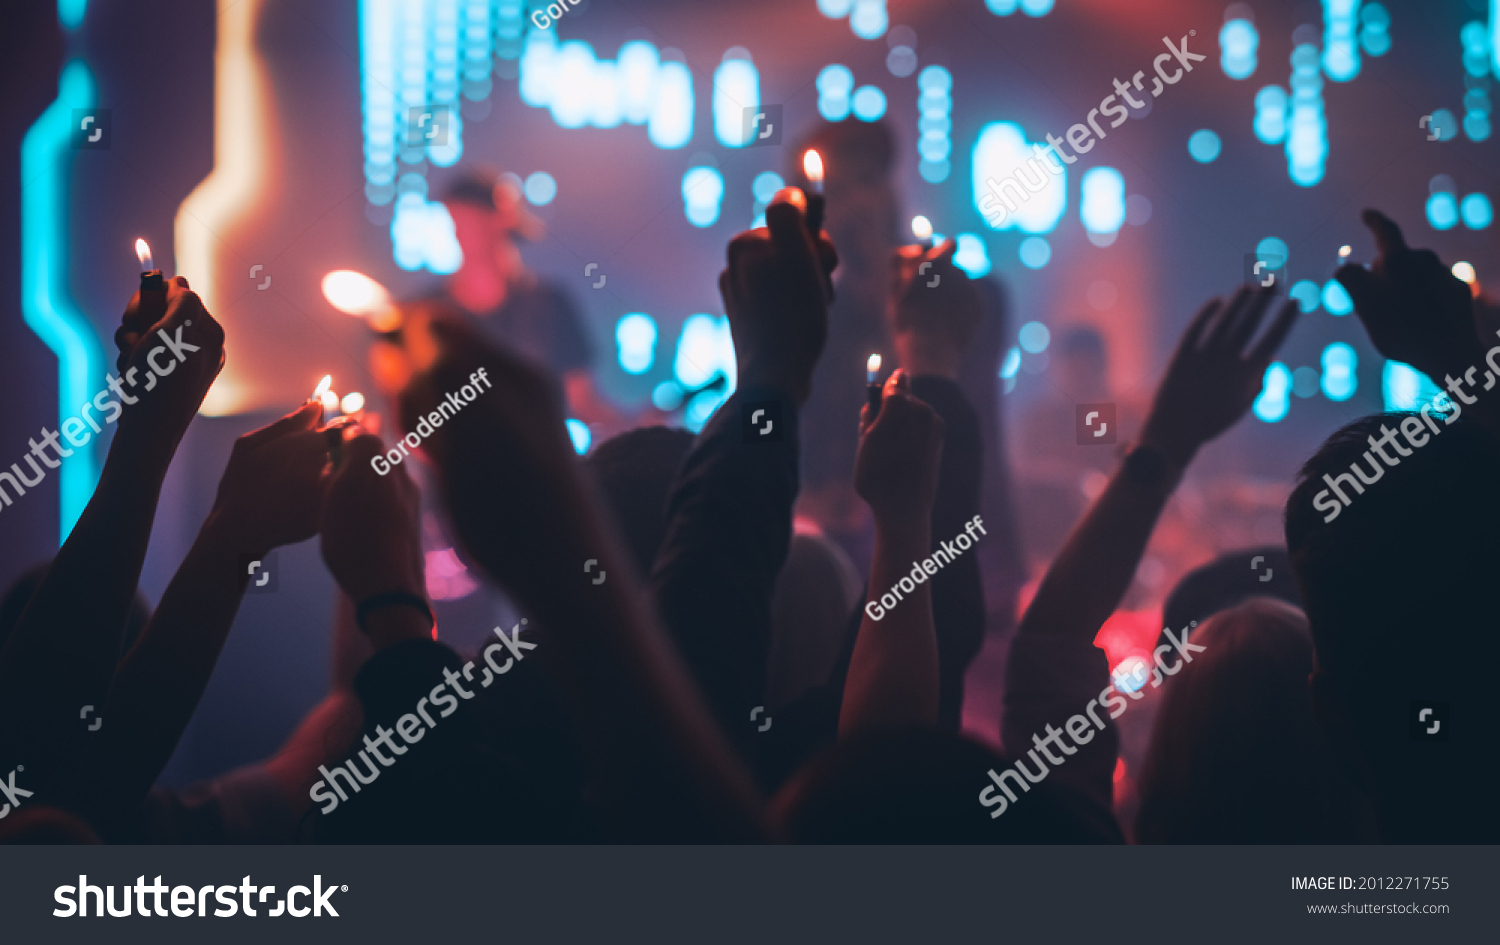 Rock Band Performing a Slow Song at a Concert in a Night Club. Front Row Crowd is Holding Lighters. Silhouettes of Fans Raise Hands in Front of Bright Colorful Strobing Lights on Stage. #2012271755